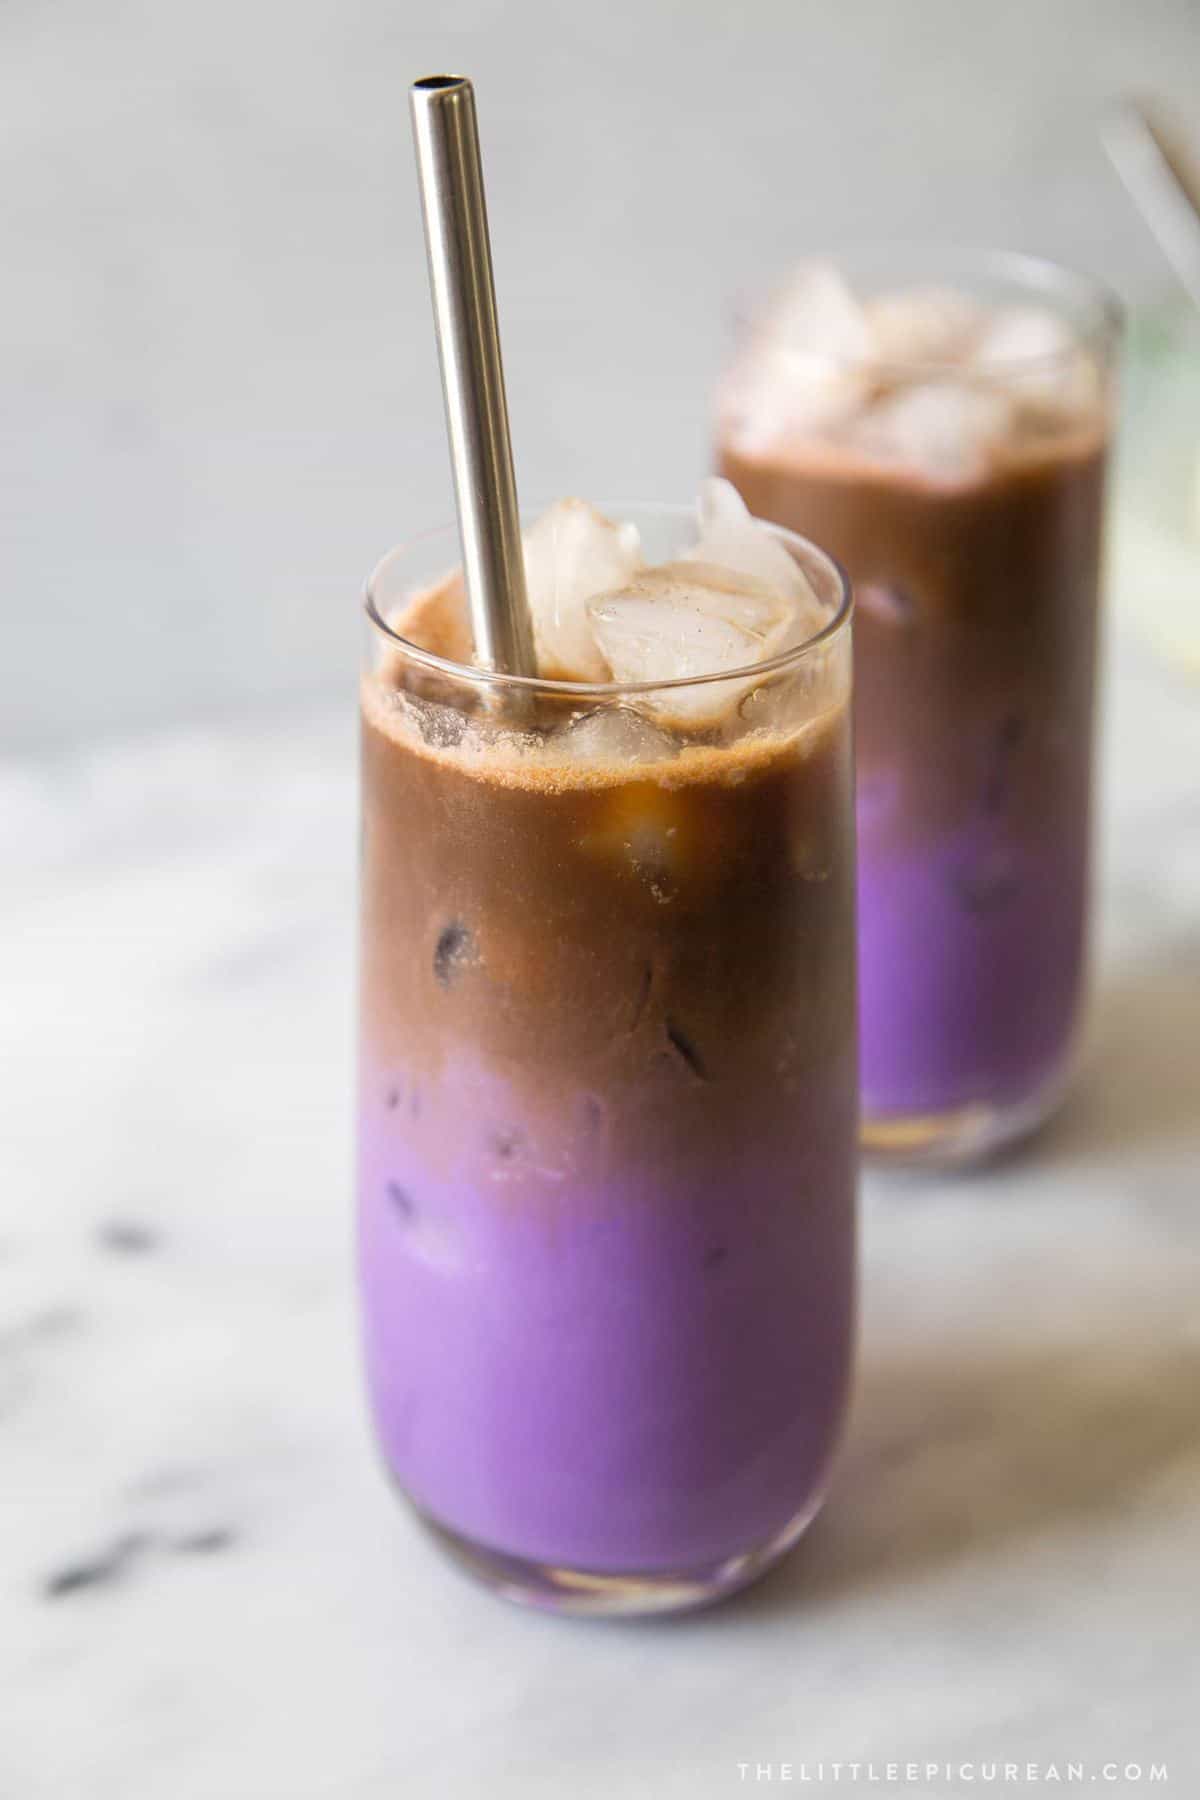 iced ube latte served in glass with metal straw. Shows distinct purple milk bottom and brown espresso topping.